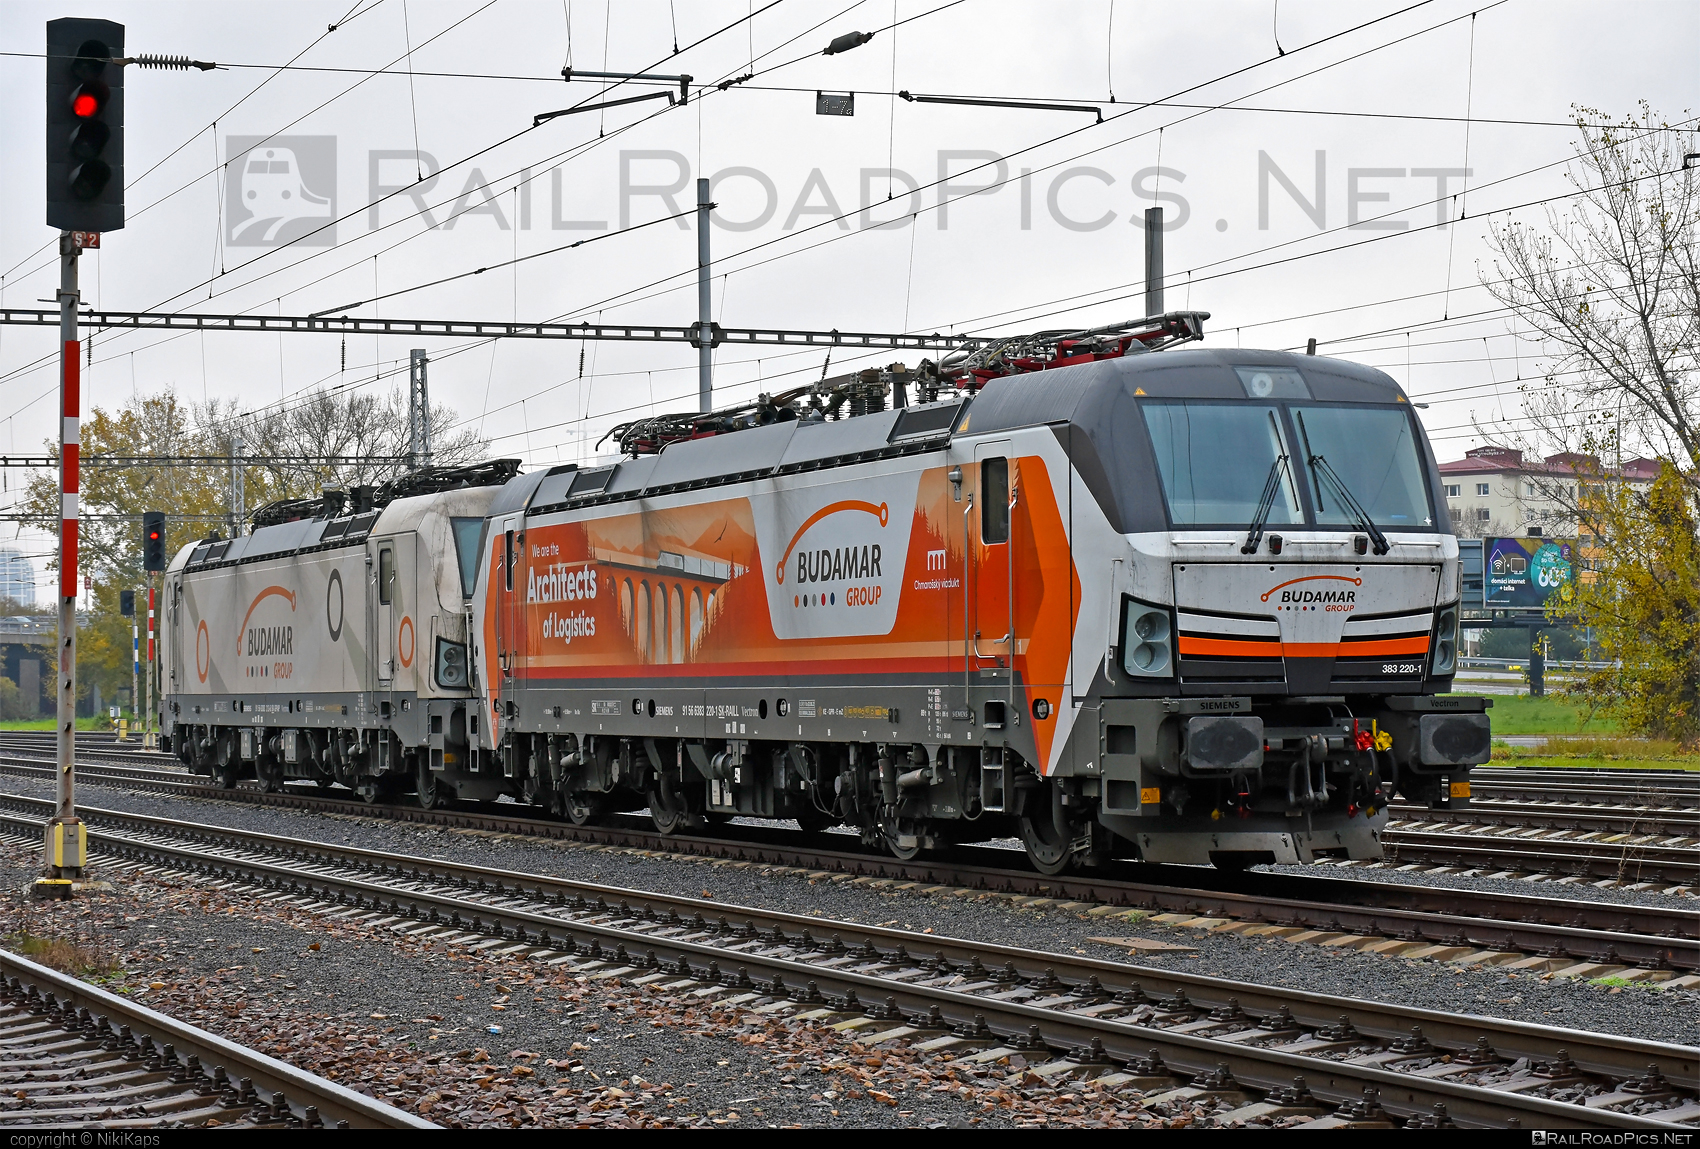 Siemens Vectron MS - 383 220-1 operated by LOKORAIL, a.s. #RollingStockLease #RollingStockLeaseSro #budamar #lokorail #lrl #raill #siemens #siemensVectron #siemensVectronMS #vectron #vectronMS